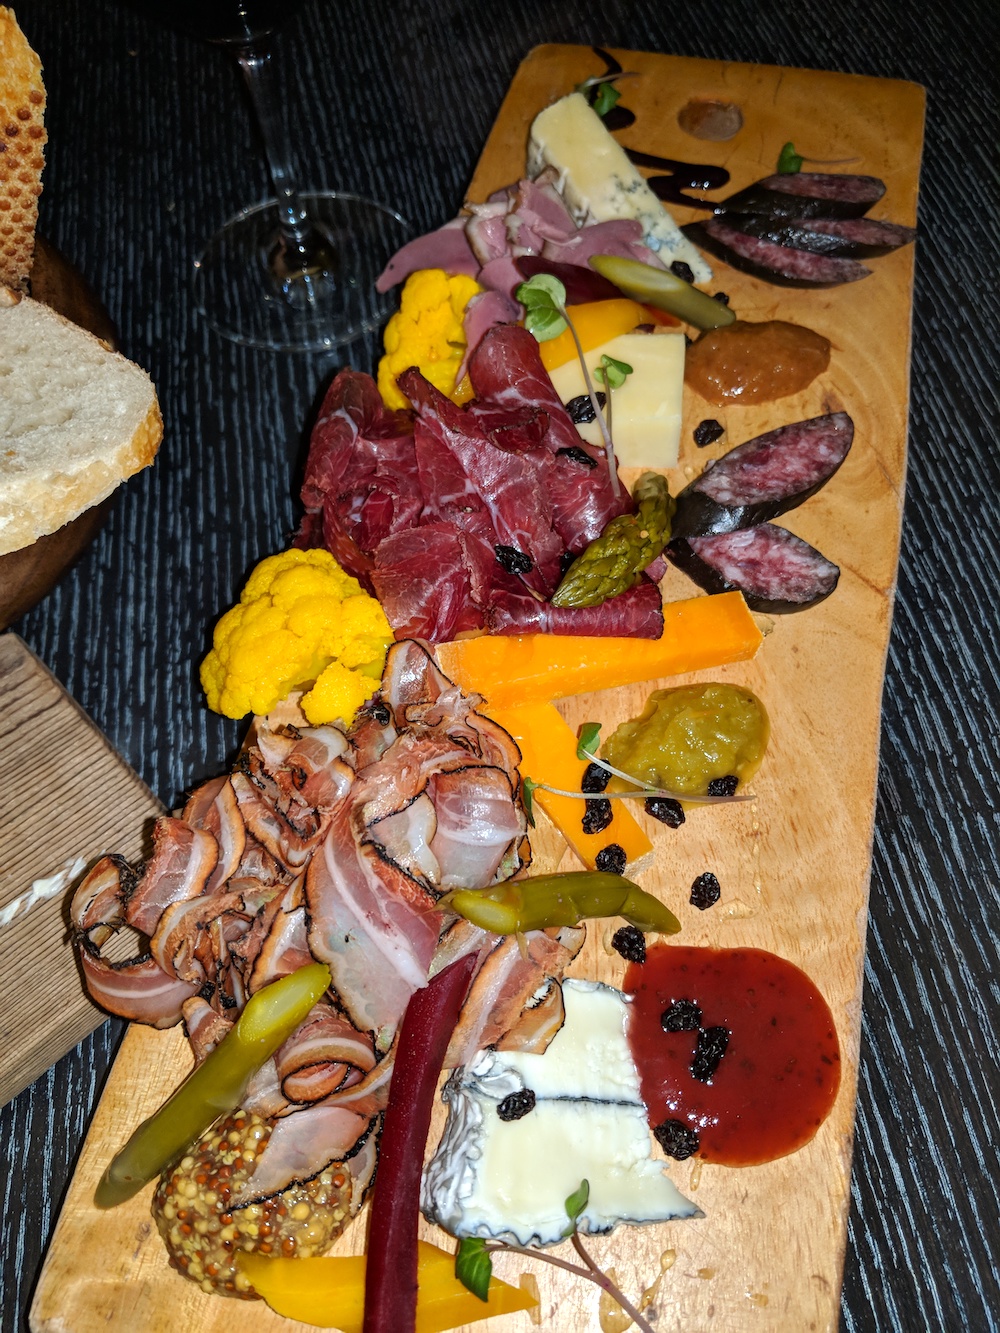 Grapes Charcuterie Board - Chef's Selection